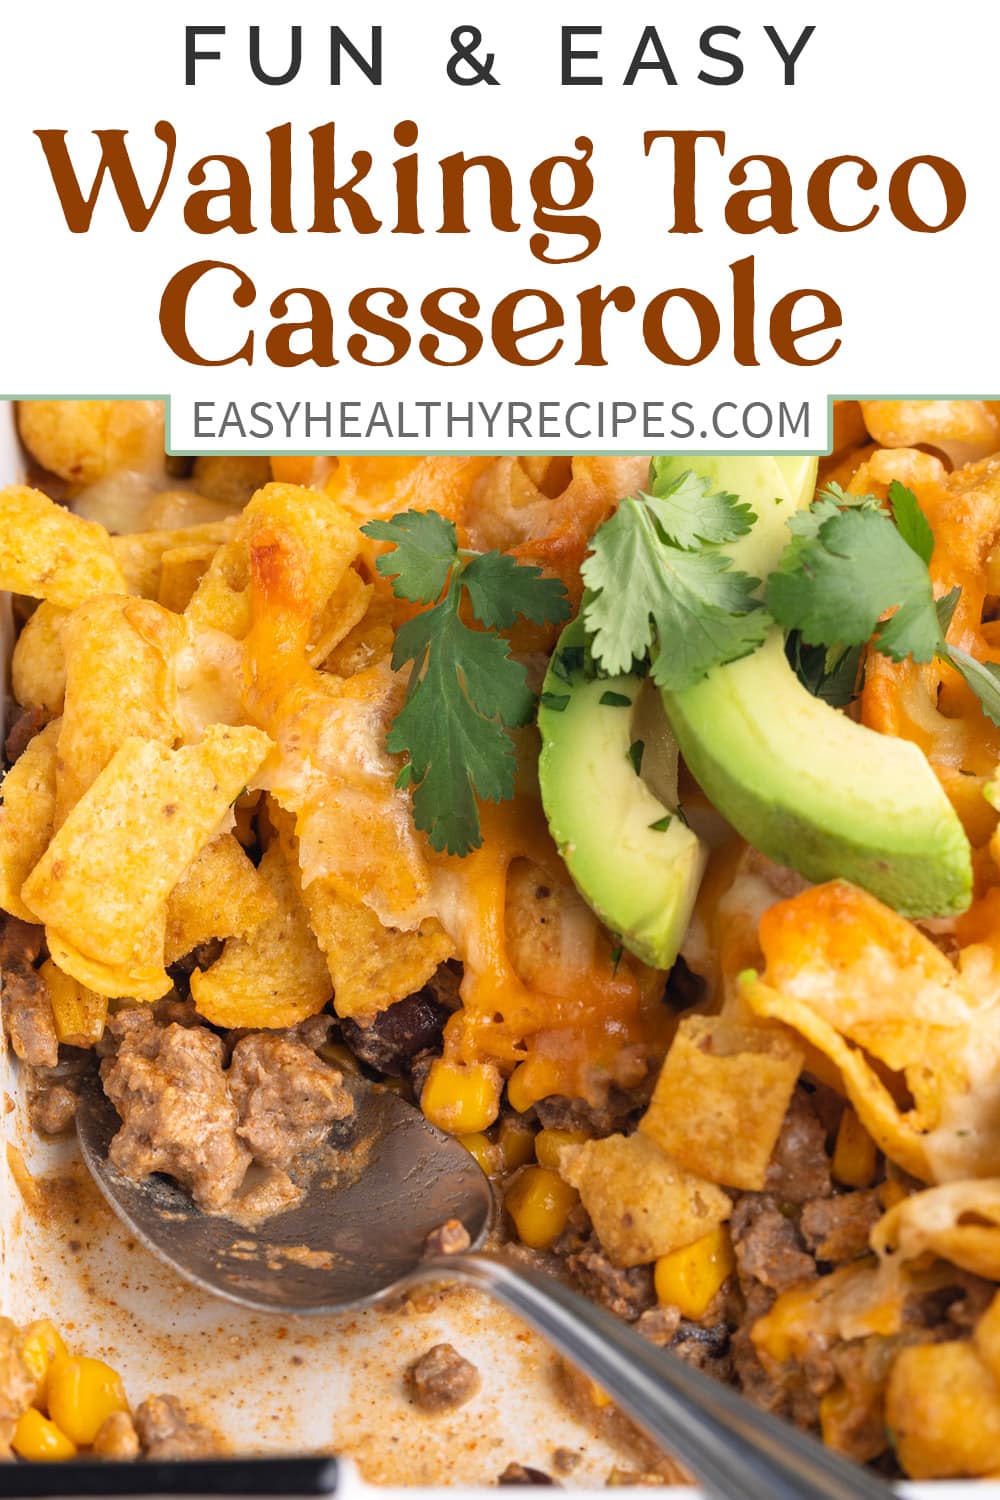 Pin graphic for walking taco casserole.